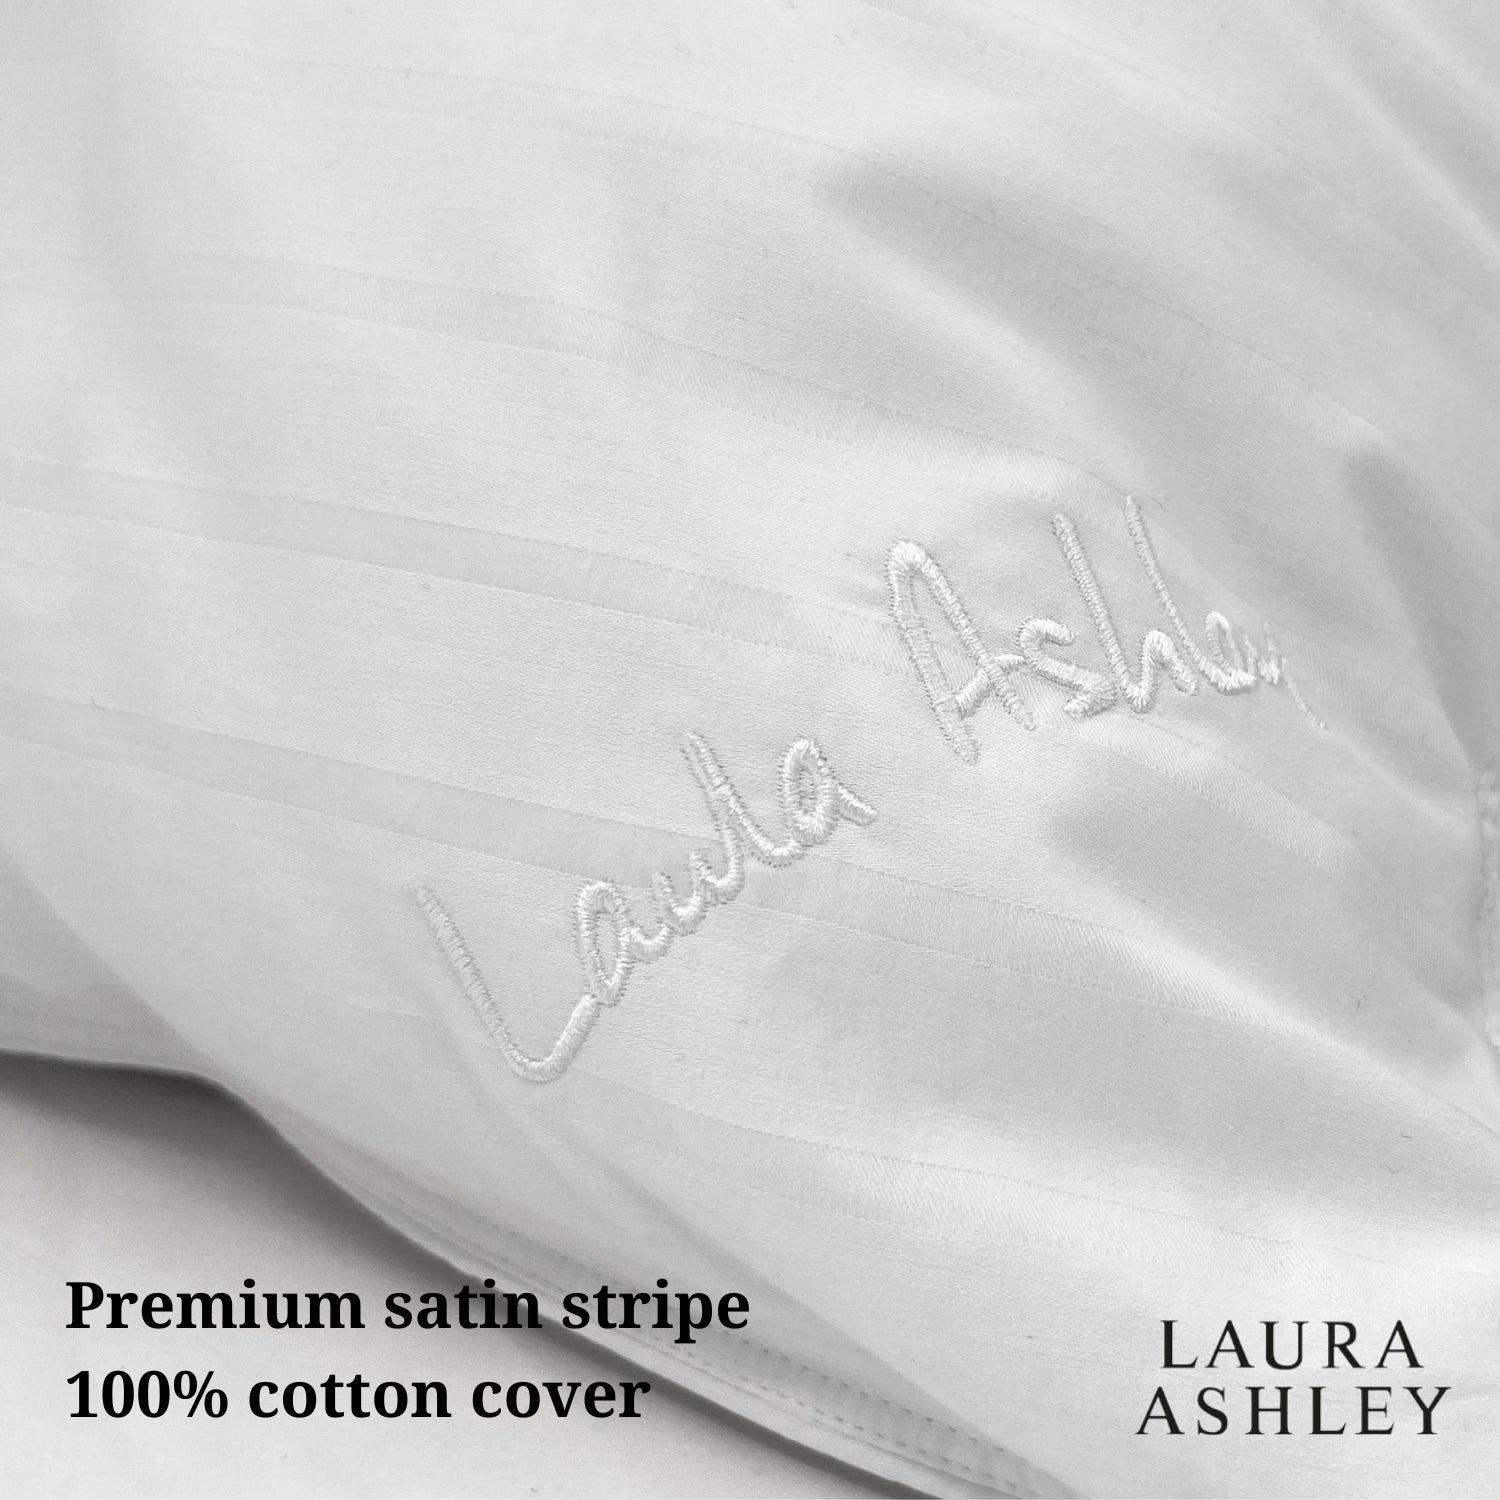 Laura Ashley Luxury Front Sleeper pillow with luxury satin cover 